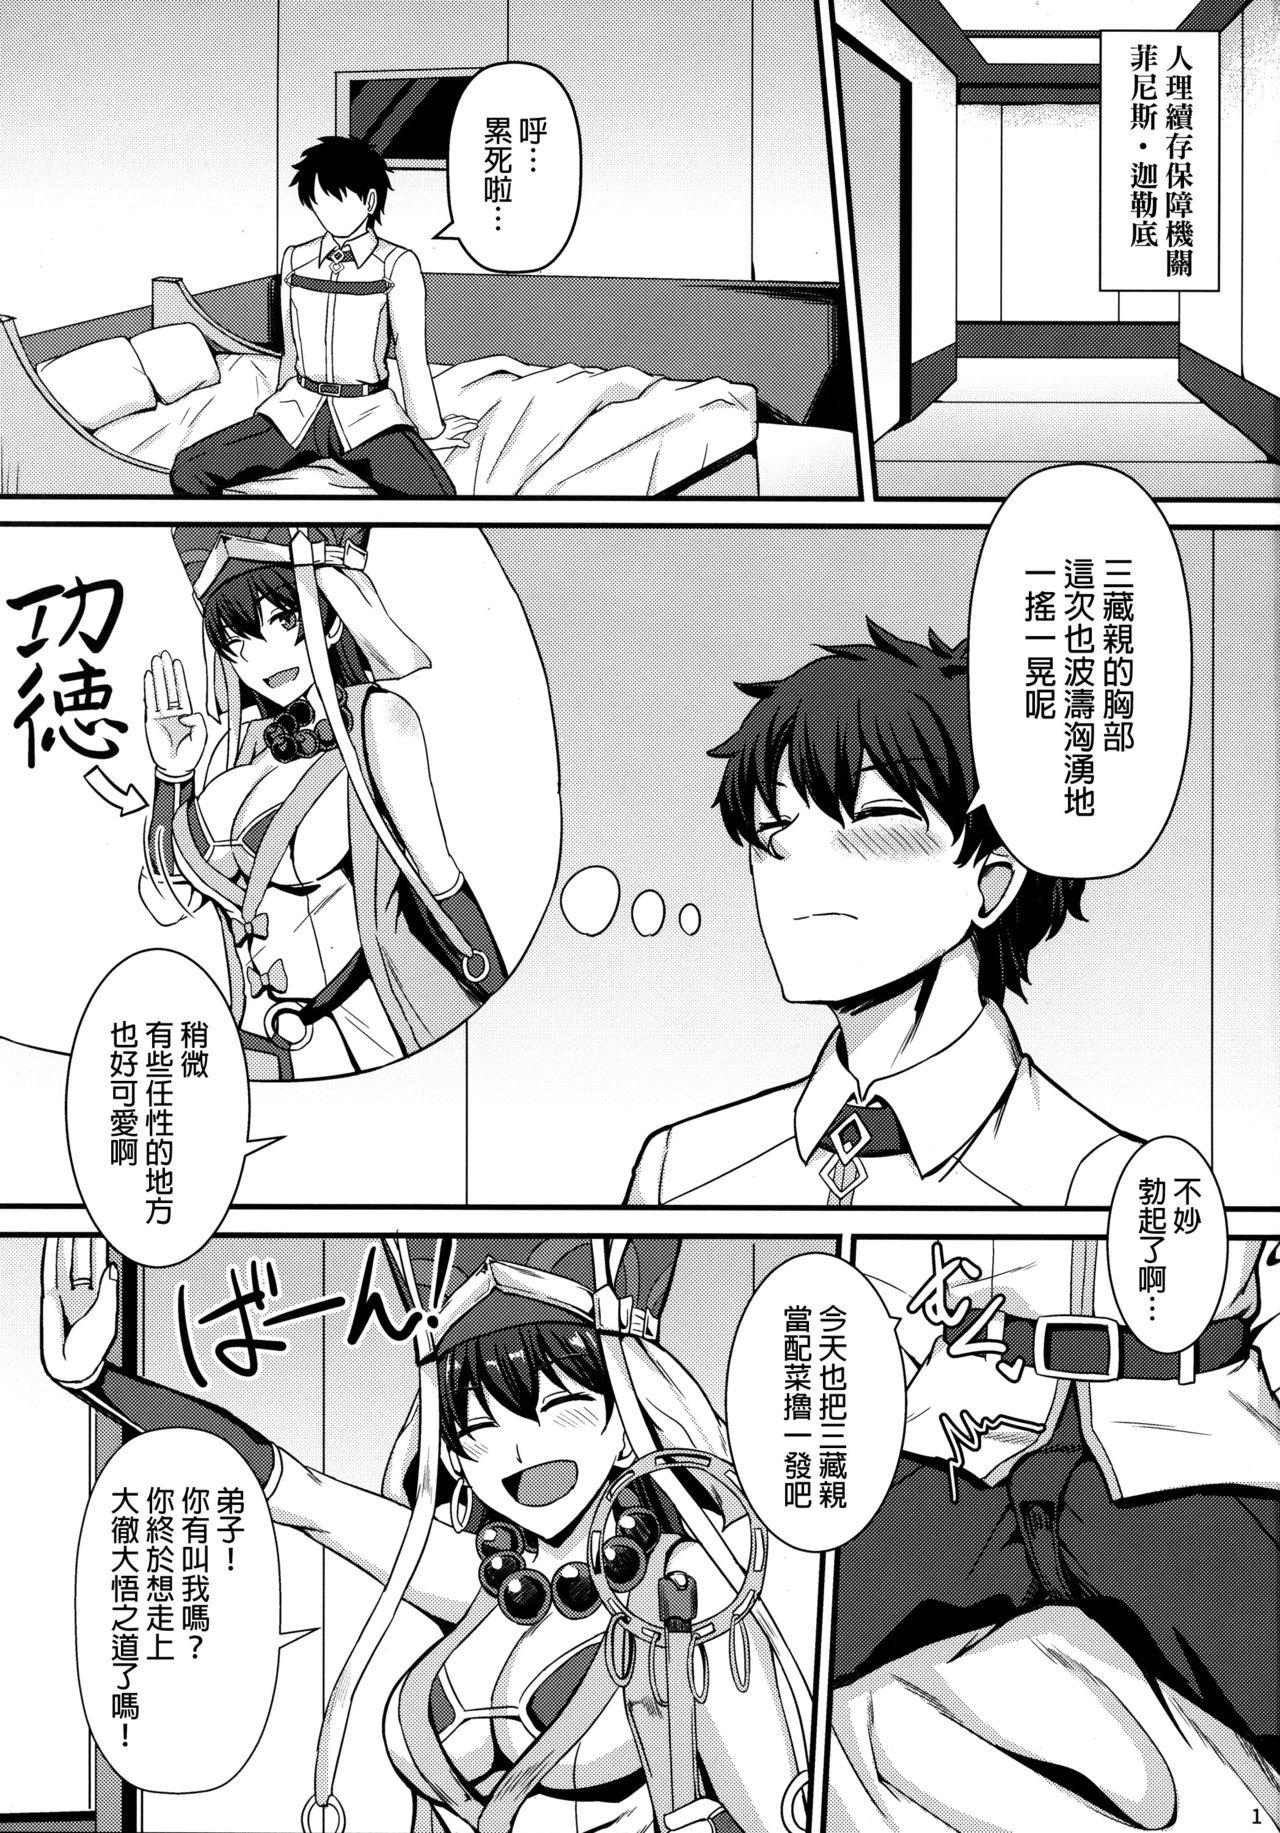 Teacher Burning Halo - Fate grand order Hot Whores - Page 2